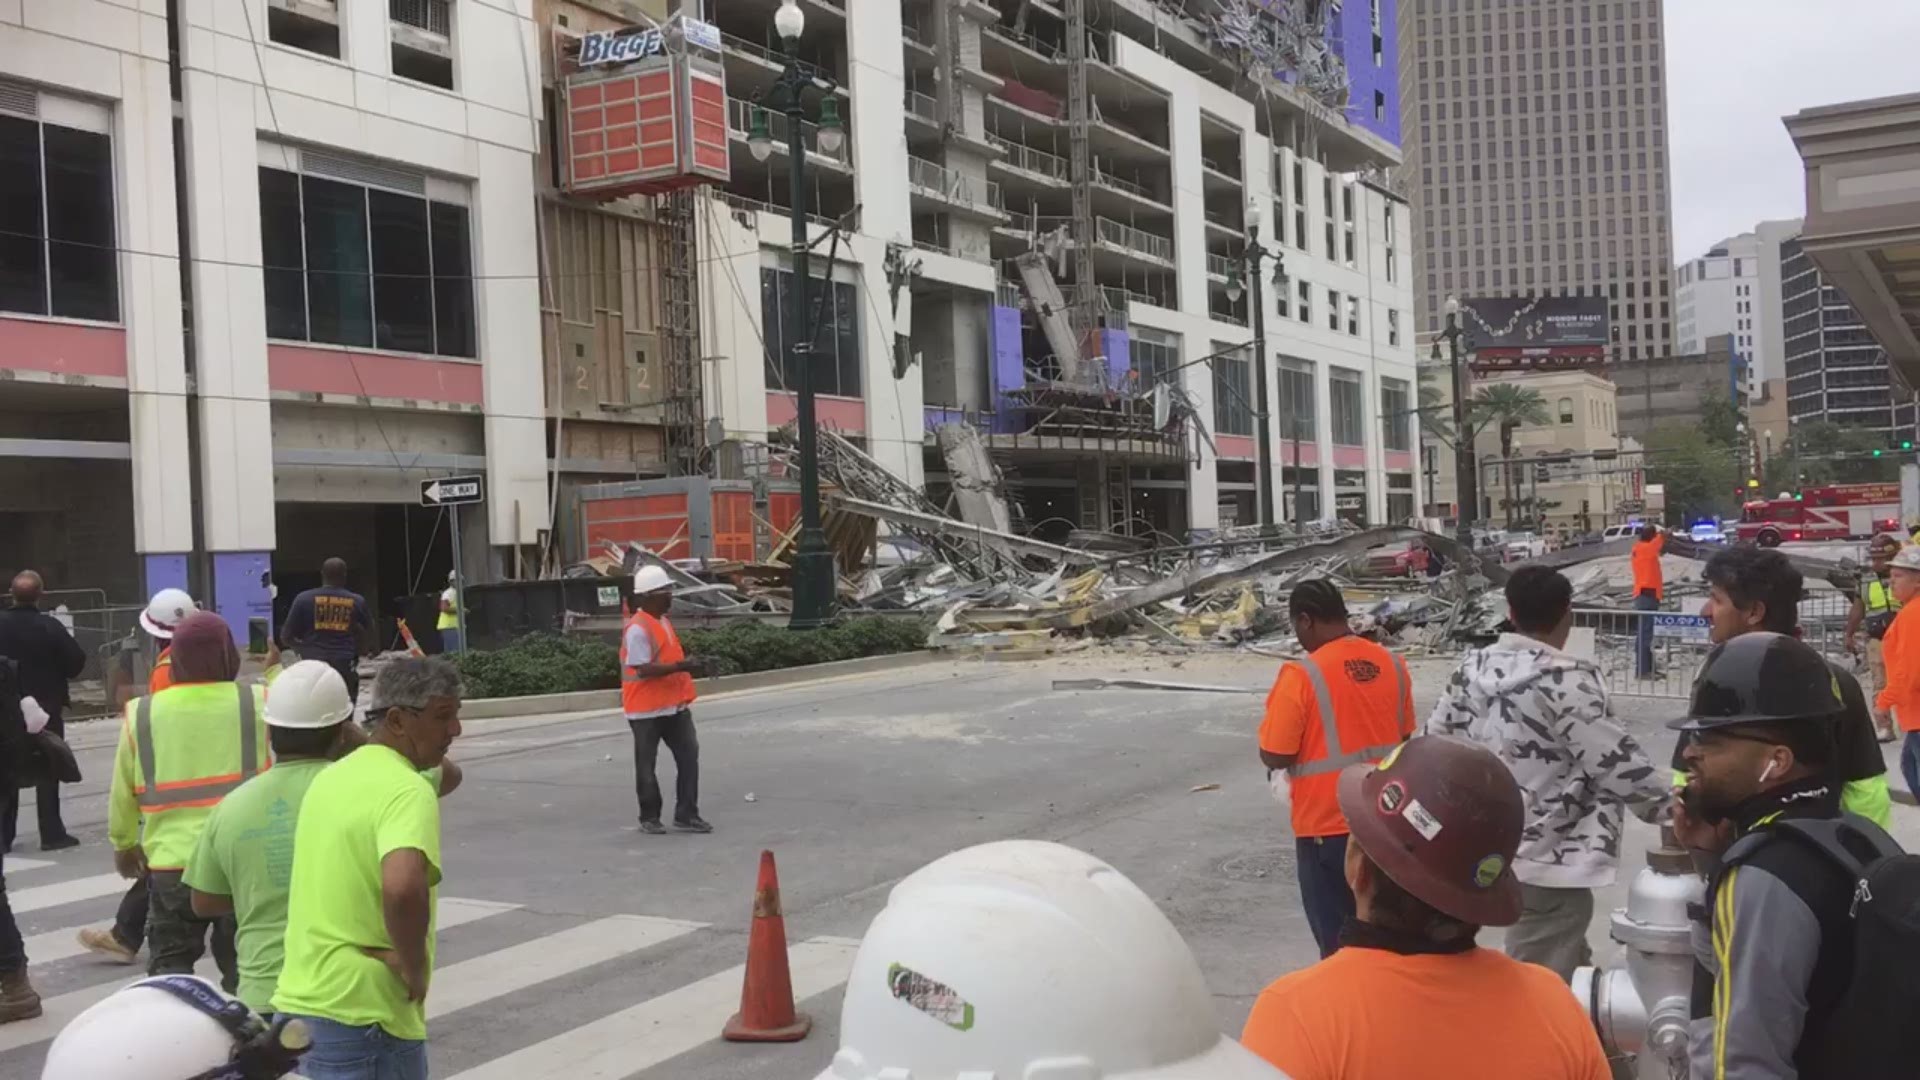 Video courtesy of David Donze shows the moments after the Hard Rock Hotel collapsed on Canal Street in New Orleans Saturday, Oct. 12.